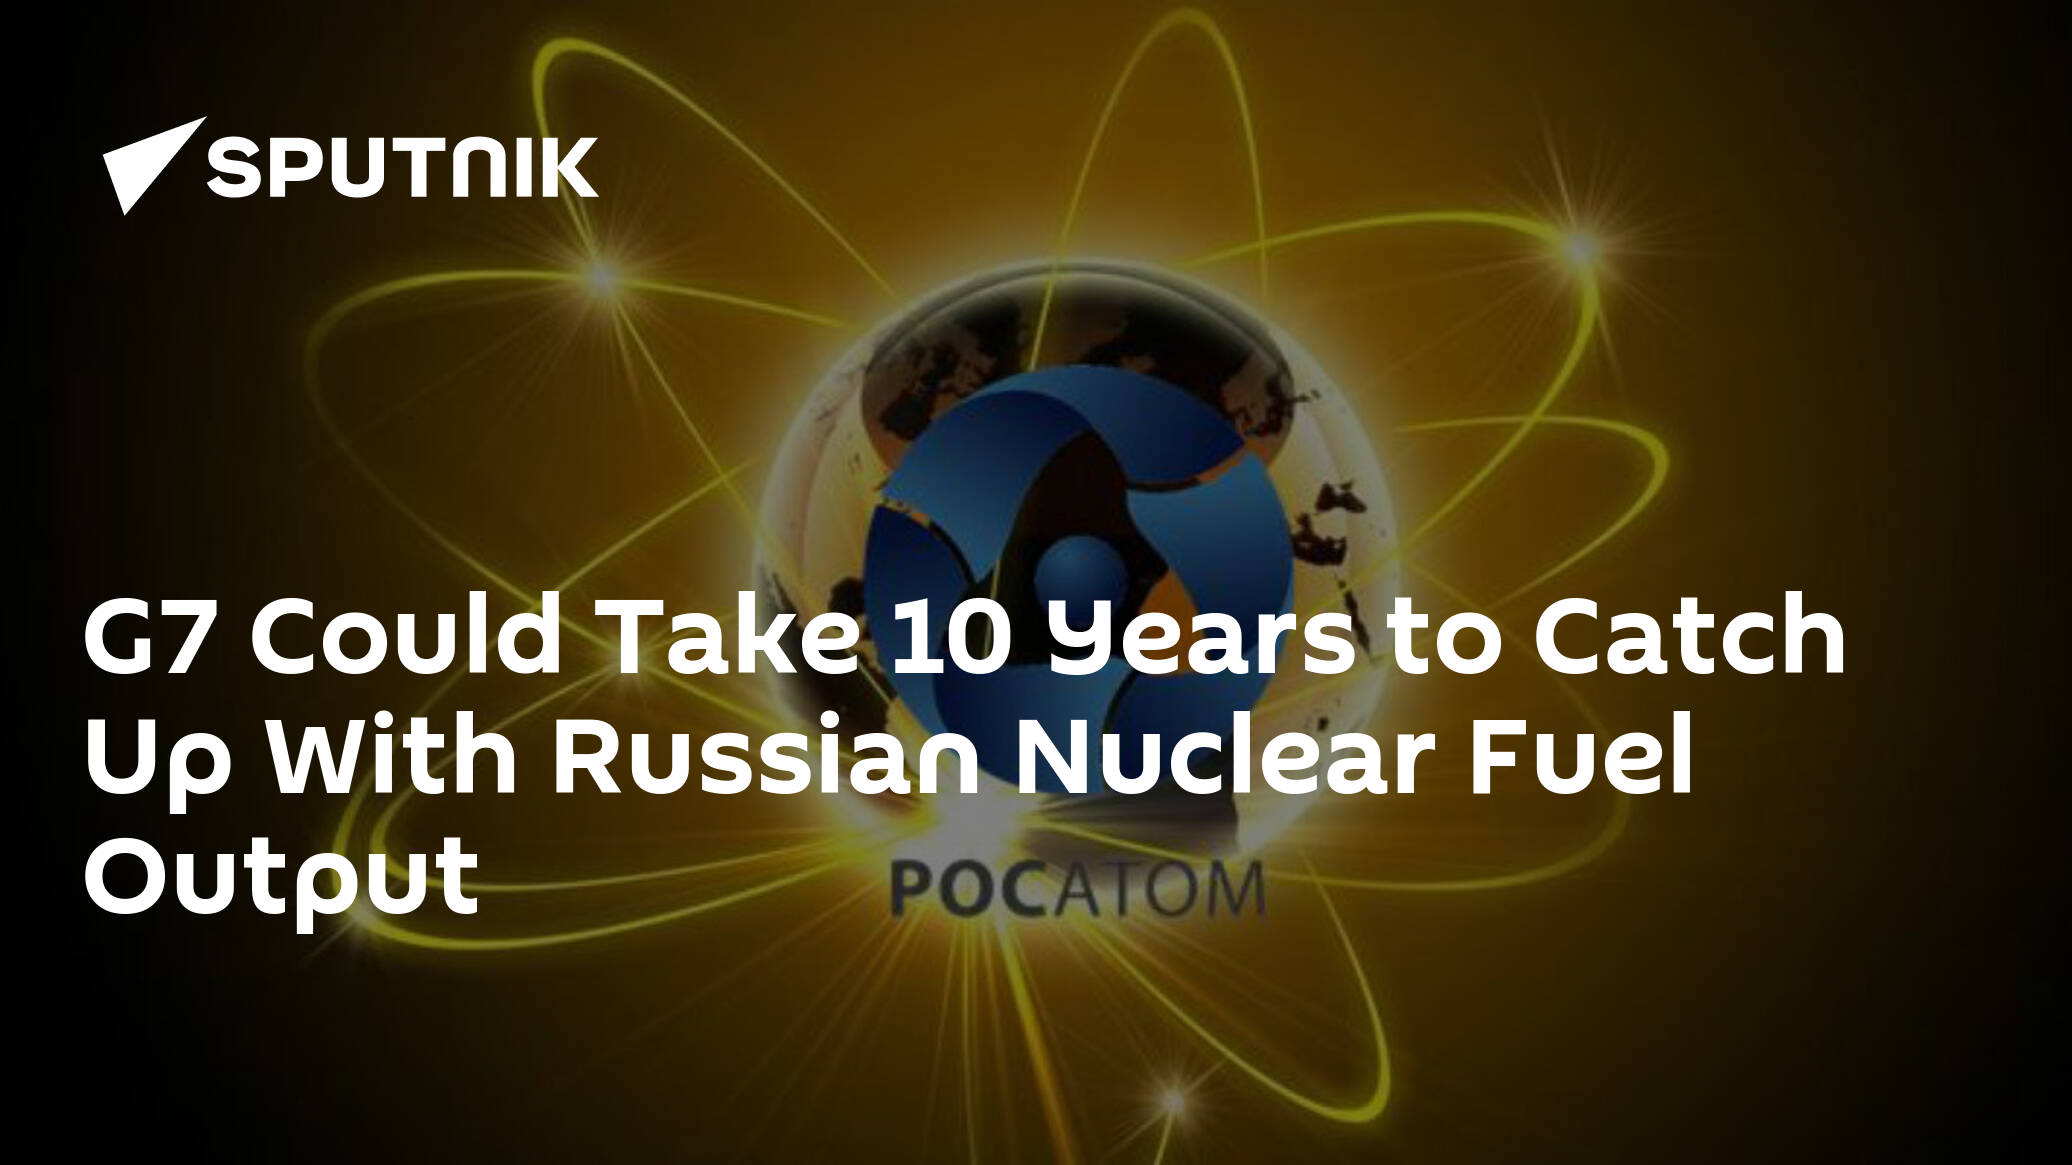 G7 Could Take 10 Years to Catch Up With Russian Nuclear Fuel Output